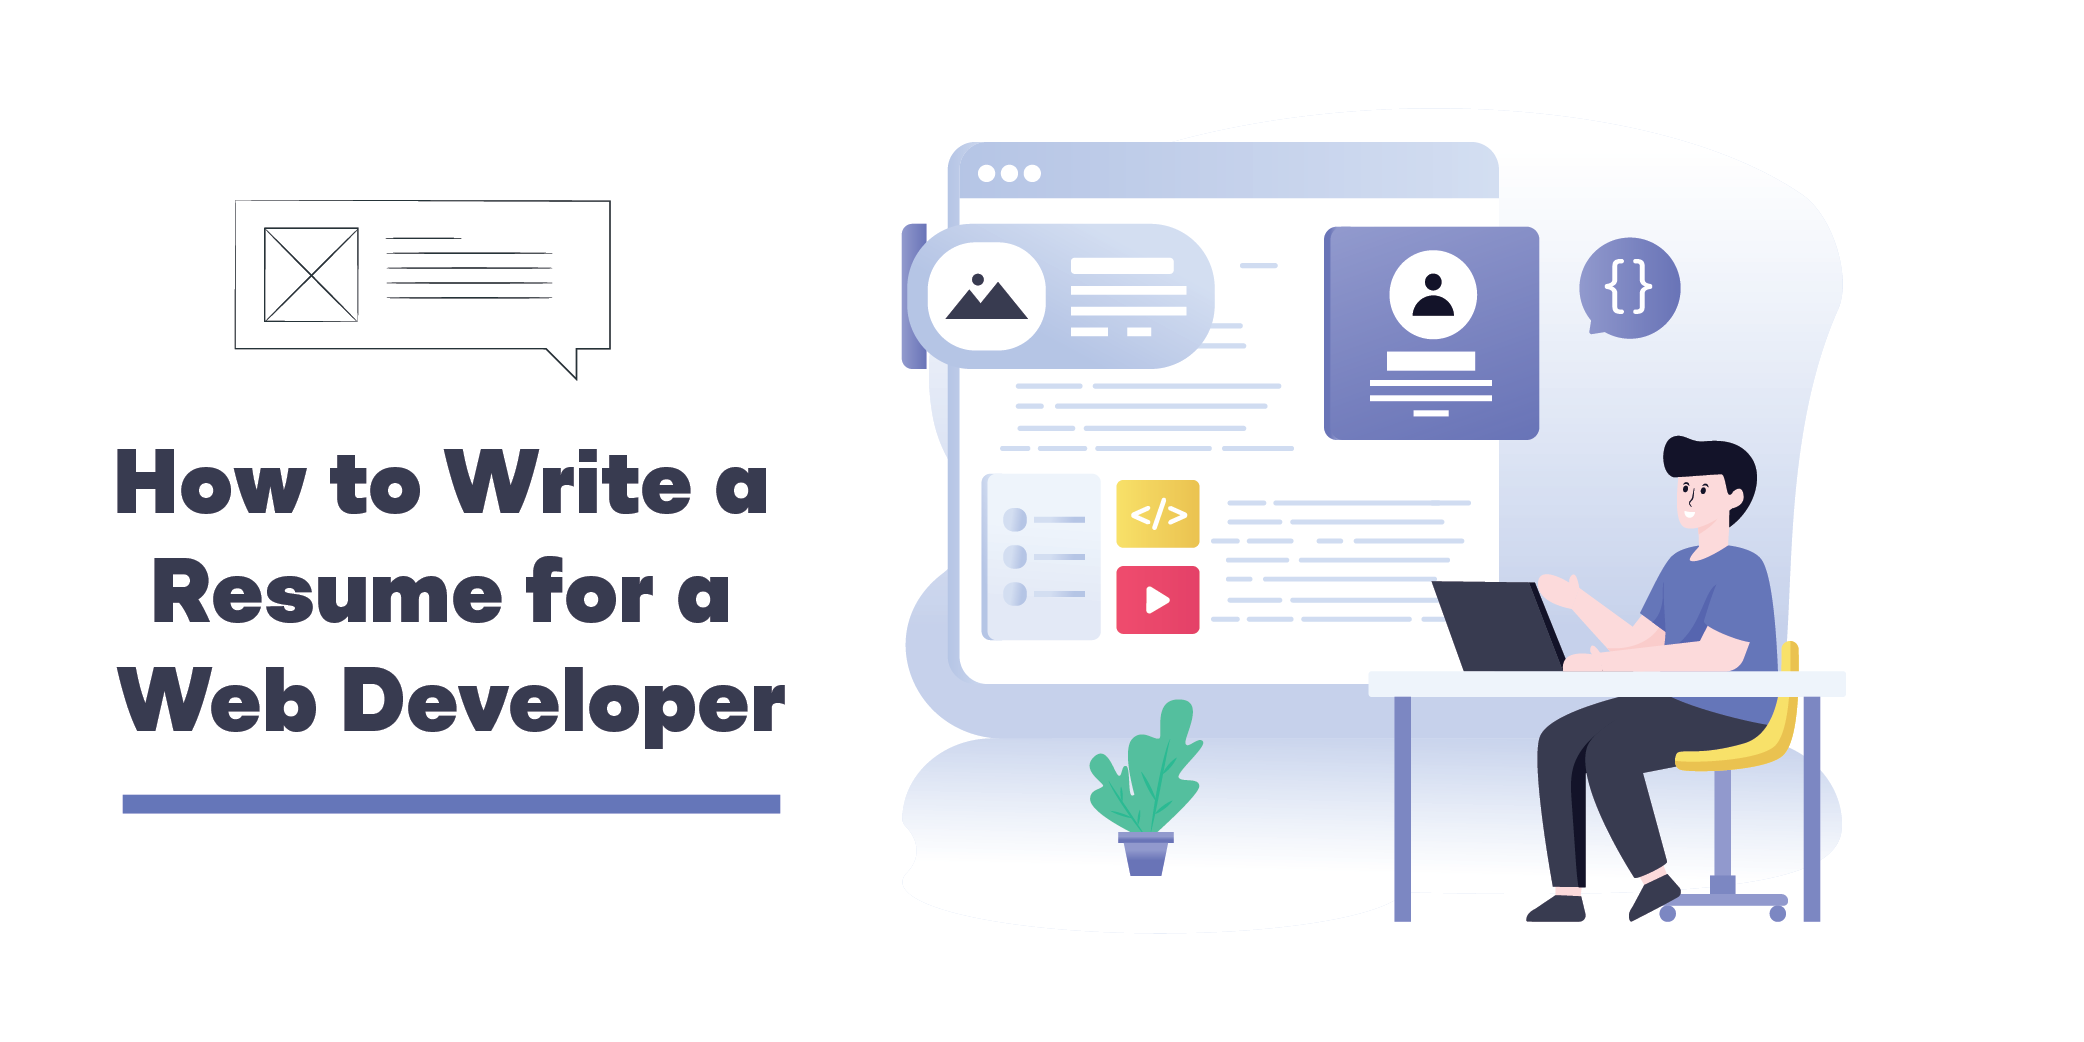 23199-how-to-write-a-resume-for-a-web-developer.png